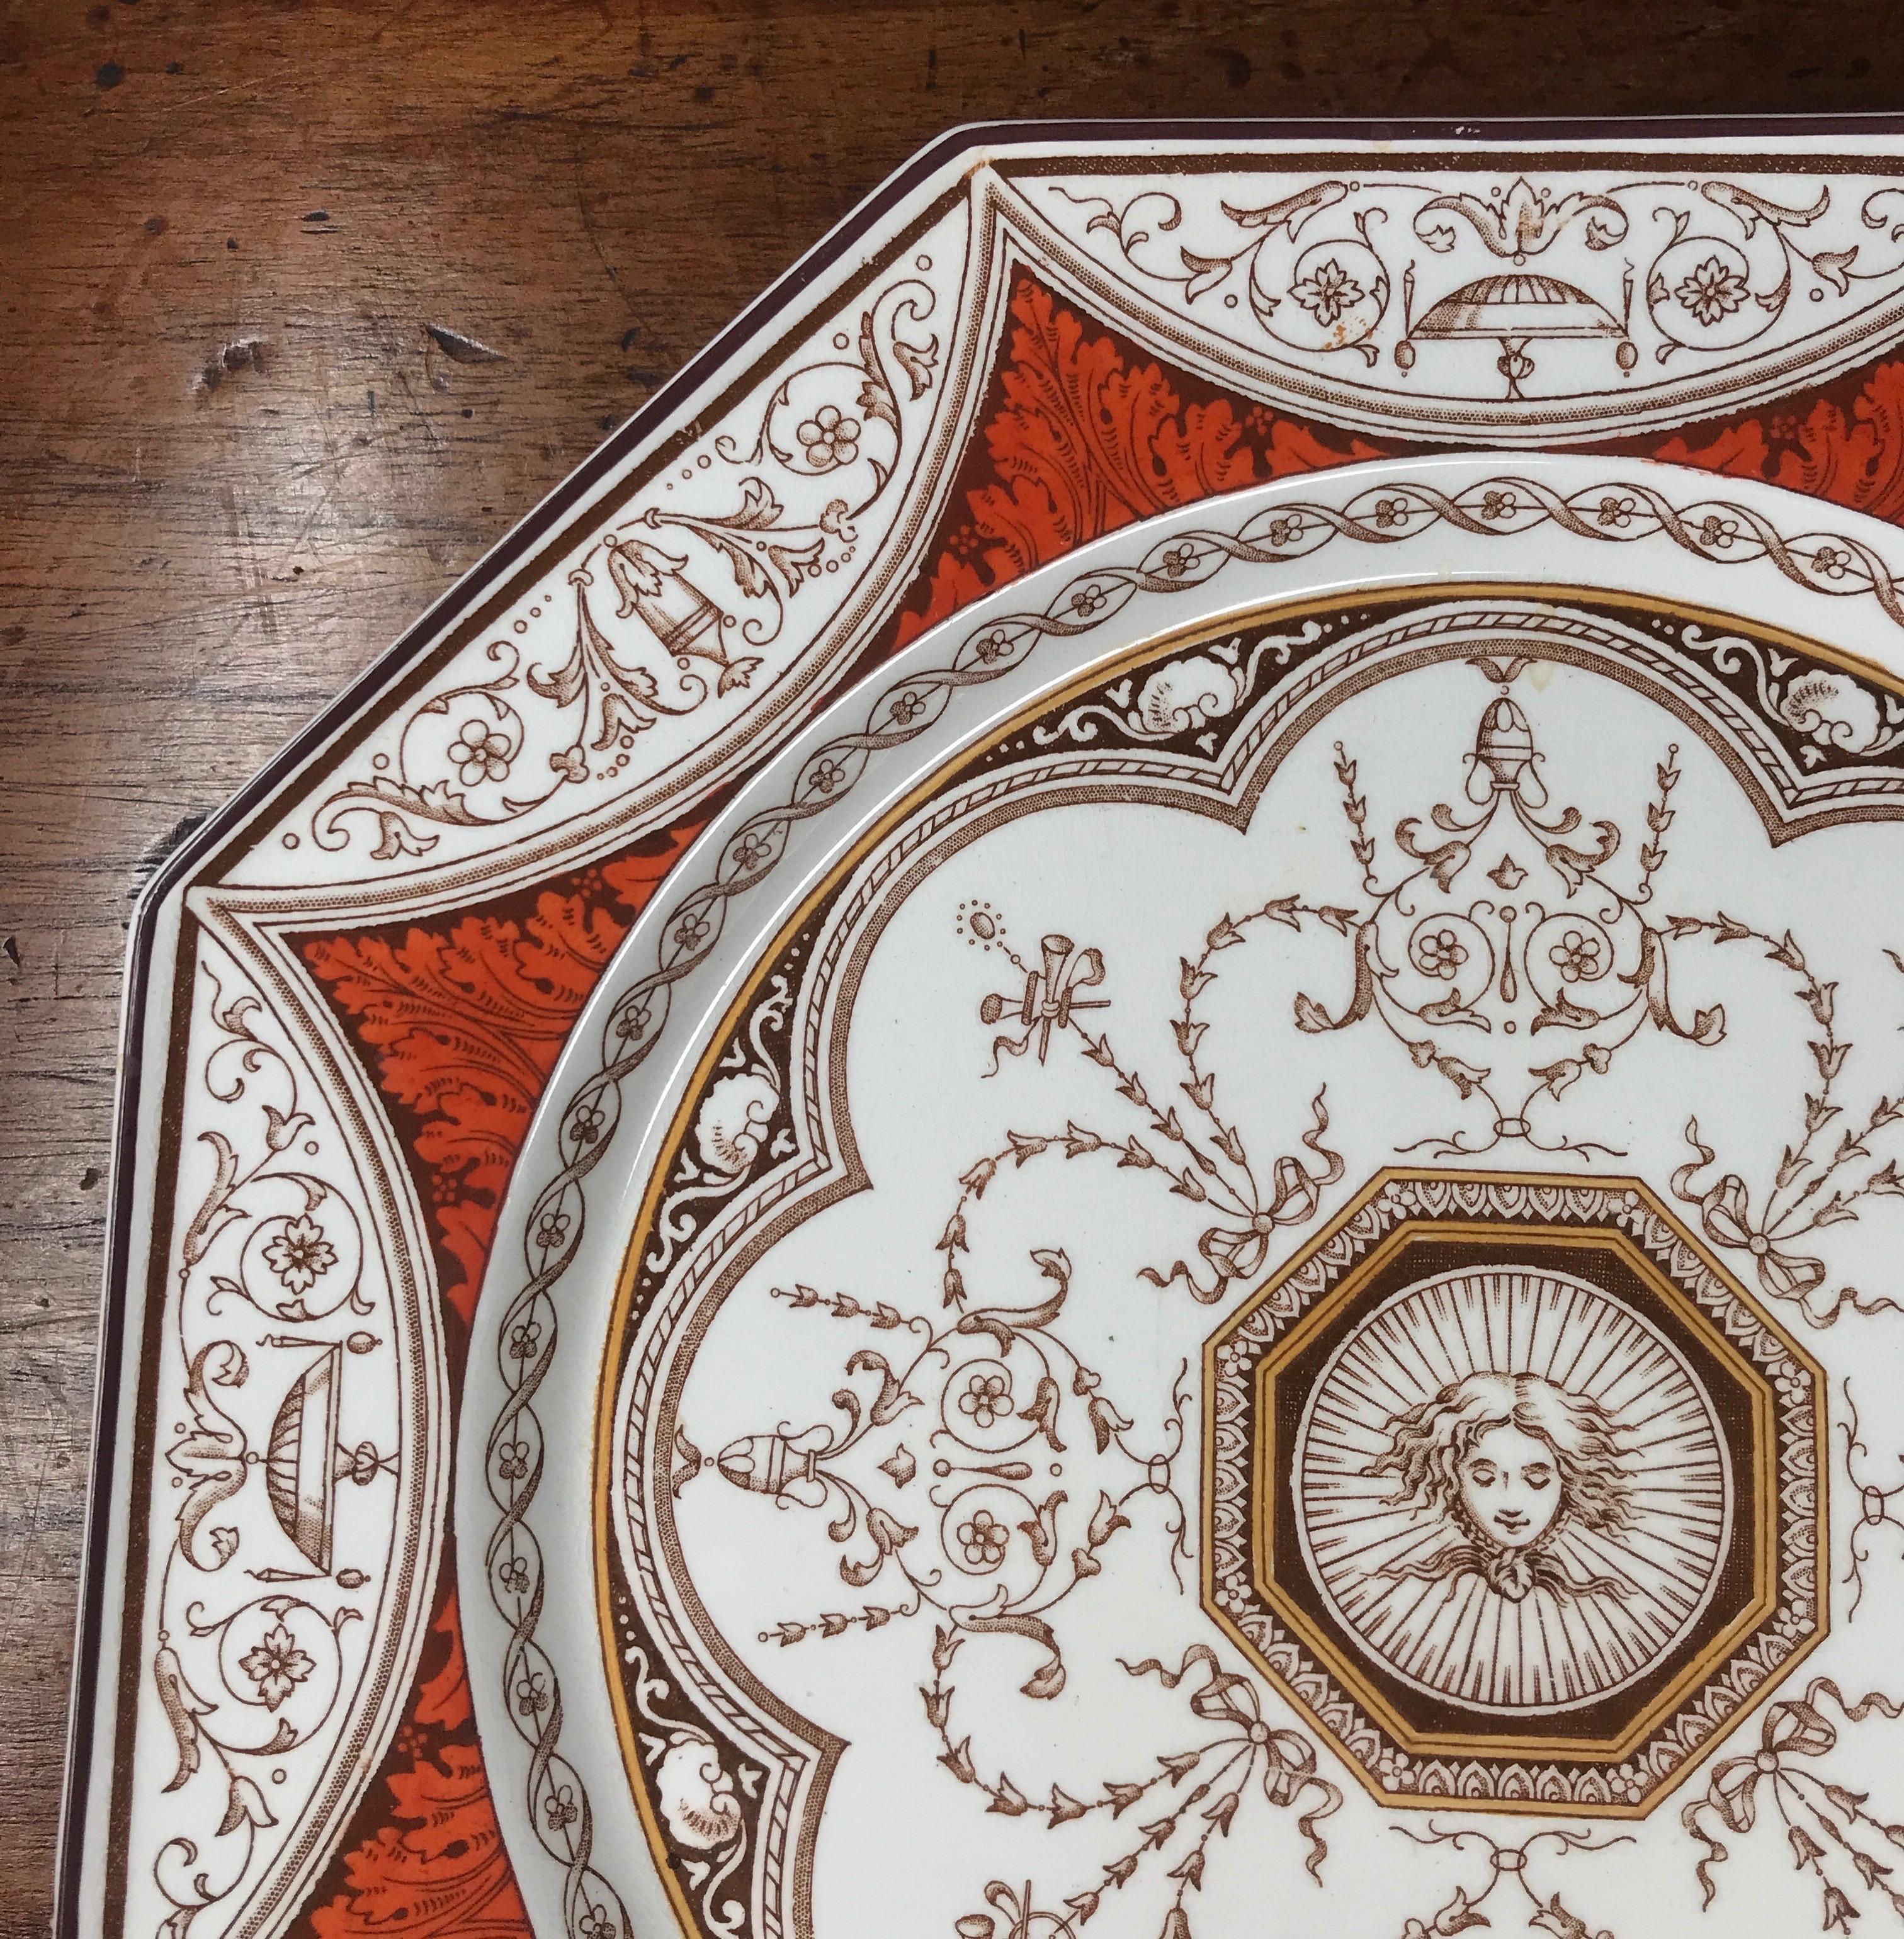 Minton octagonal plate with an intricate printed Aesthetic Movement design, comprising of a lady's face to the centre, surrounded by a neo-classical influenced border of horns and vases, acanthus leaves clobbered in orange. Pattern named on reverse